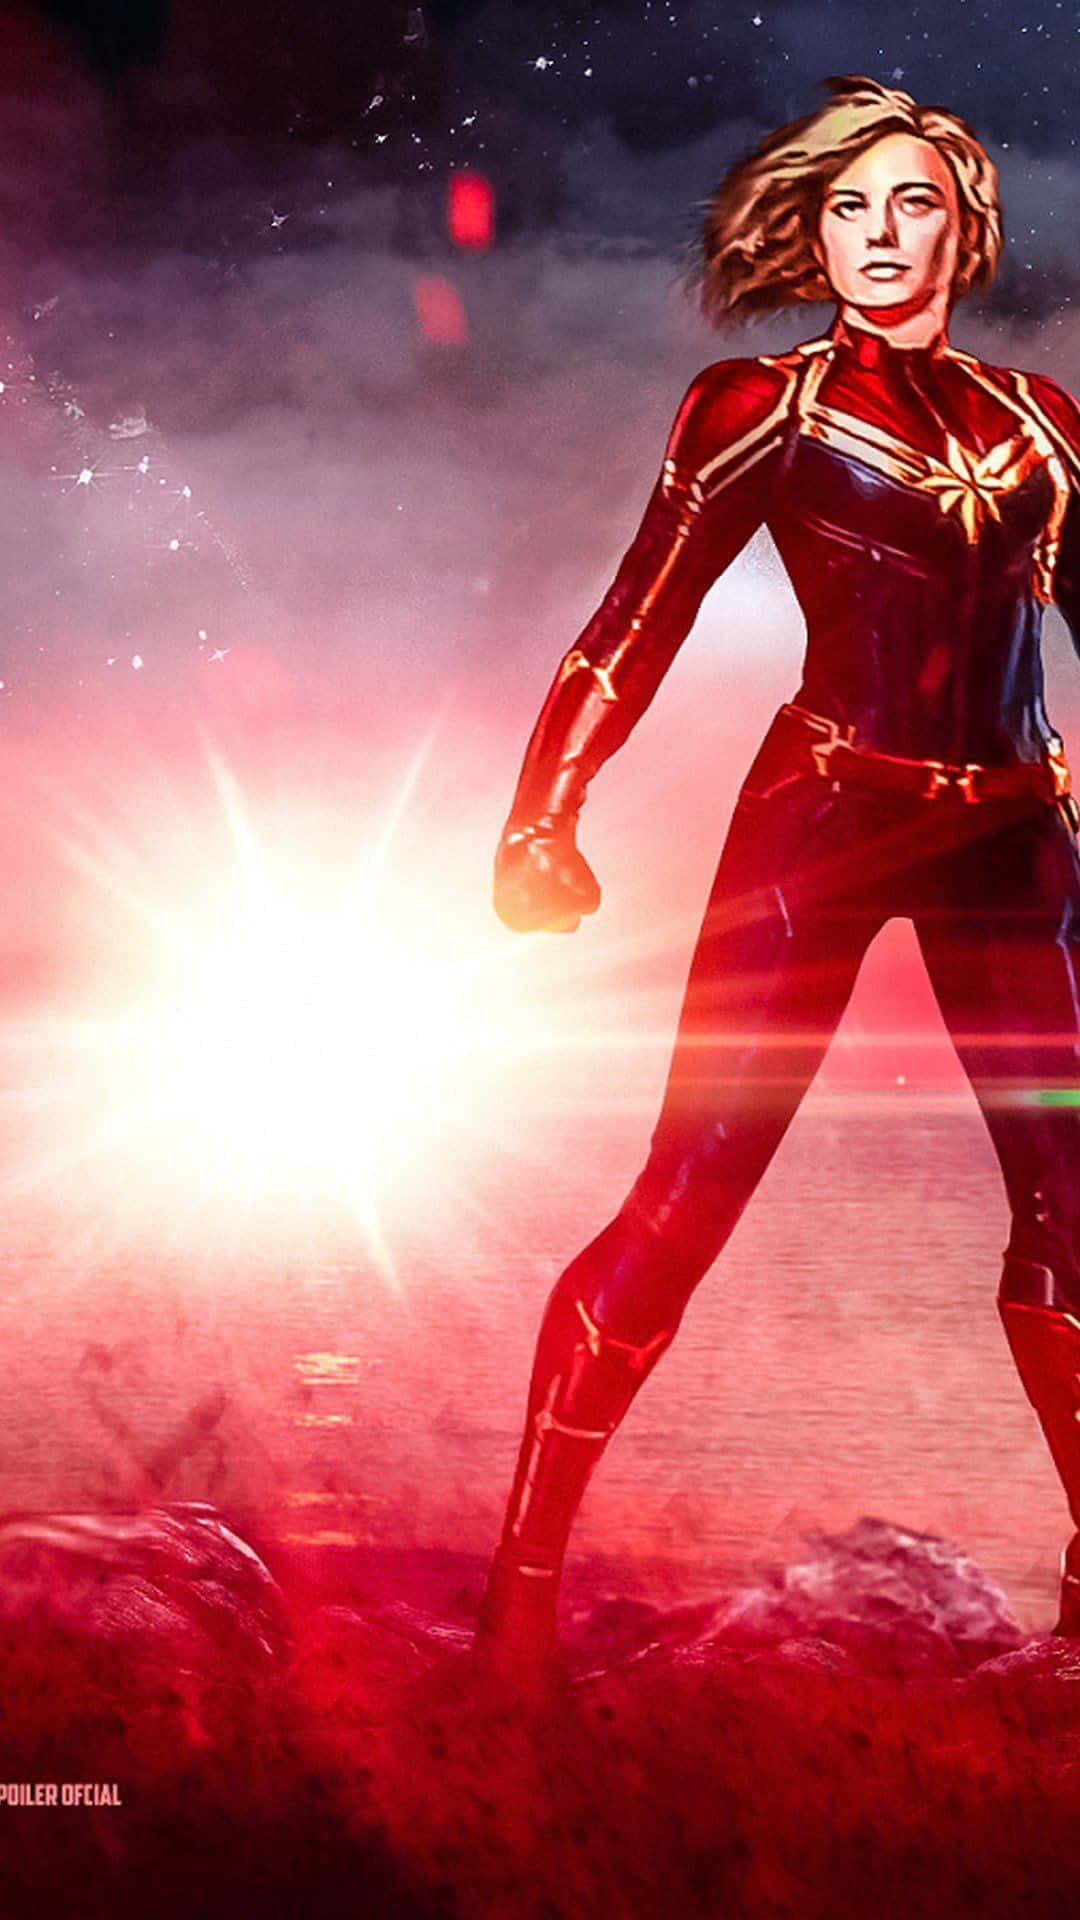 The limited edition 3D Captain Marvel poster to celebrate the hero's cinematic debut. Wallpaper